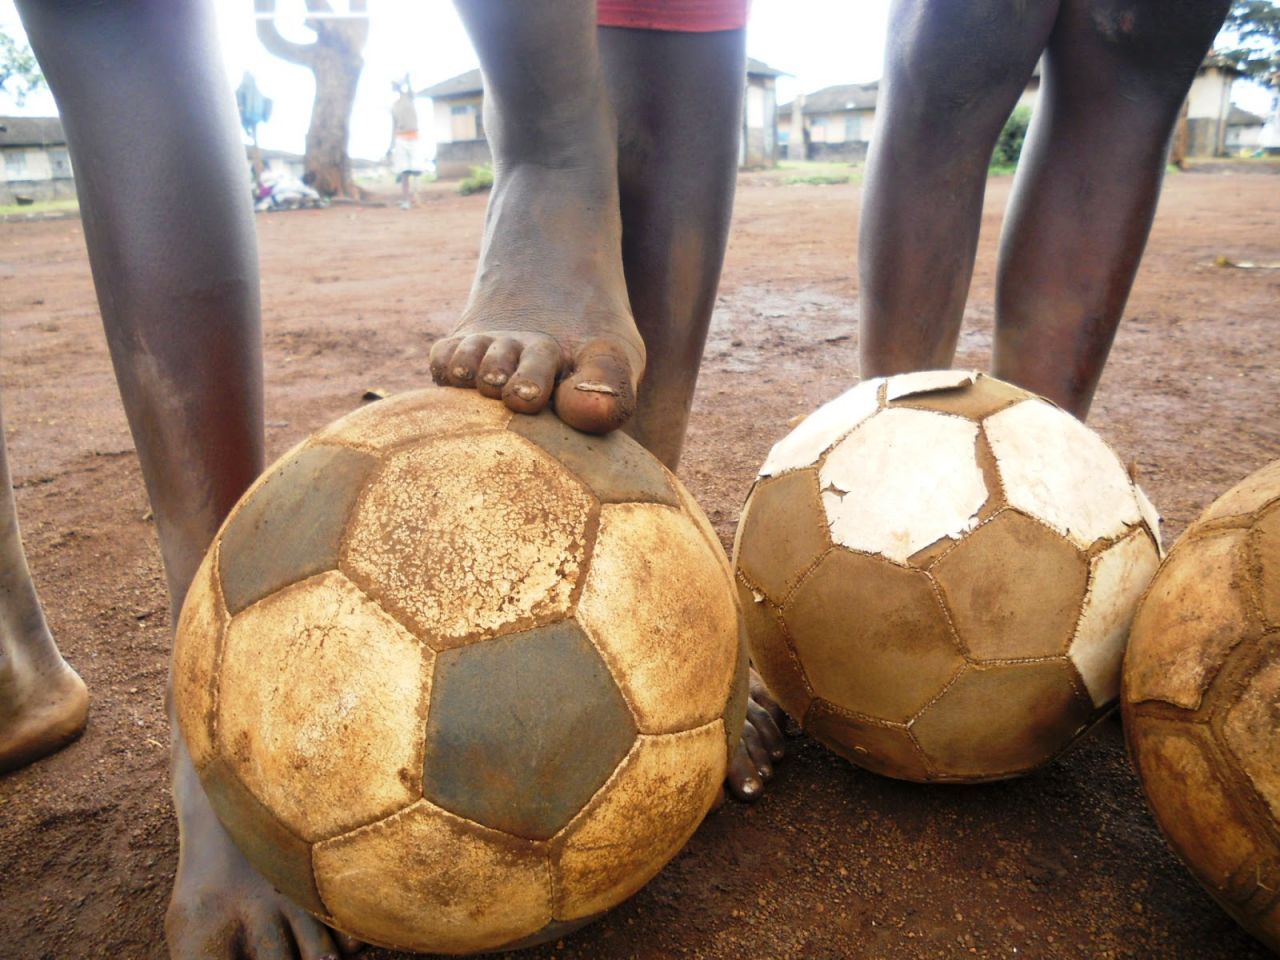 Omwanda also notes there is a lot of positivity in Mathare, and a lot of passion and commitment, as is evident in this image of children playing soccer.<br />"It doesn't matter whether we have playing shoes or not. What matters is the passion and skills," he says. 